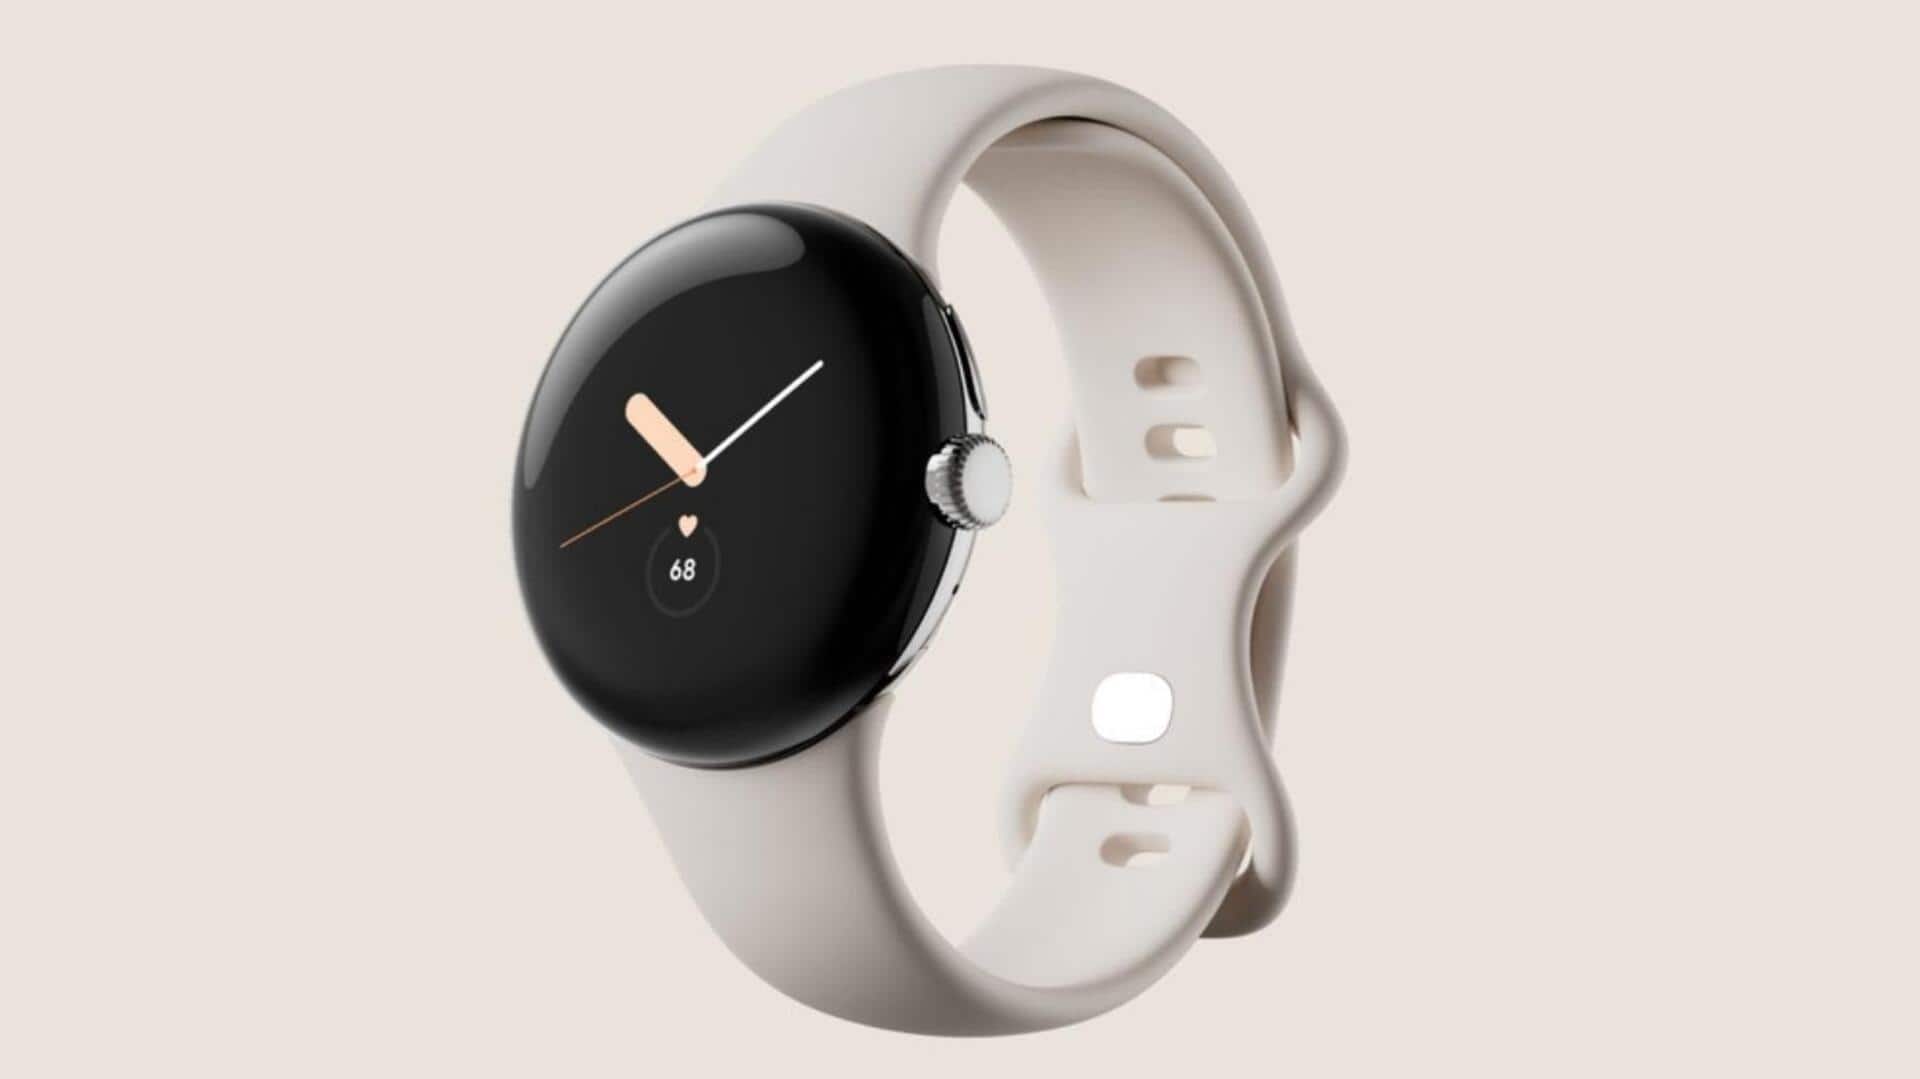 Google Calendar arrives on Wear OS smatwatches with new features